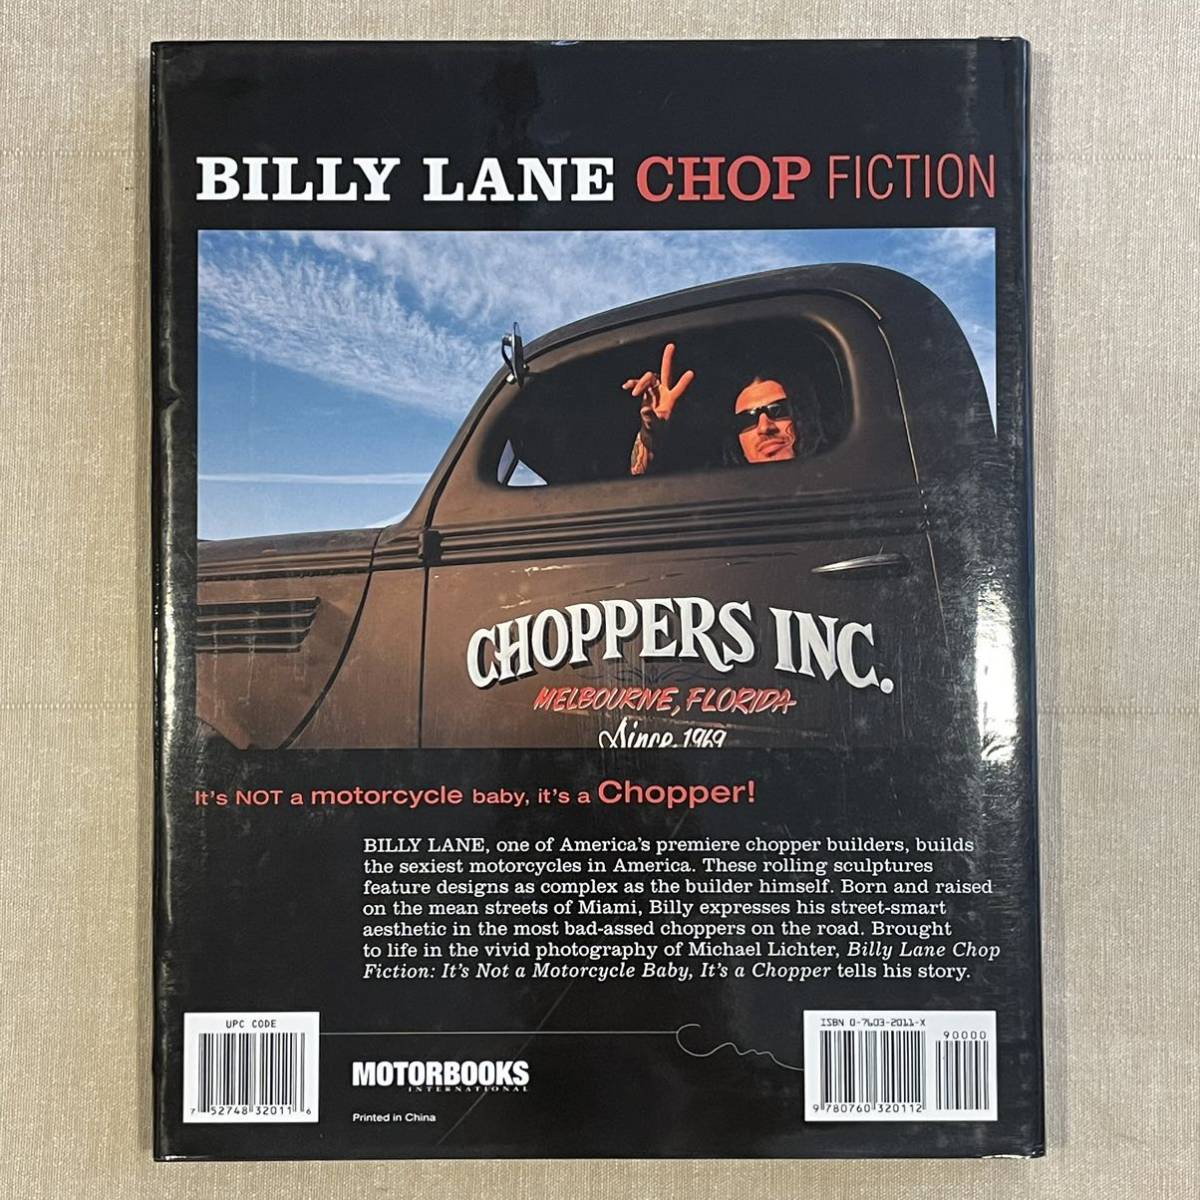 BILLY LANE CHOP FICTION: It's Not A Motorcycle Baby, It's A Chopper! チョッパー ハーレーダビッドソン 洋書_画像2